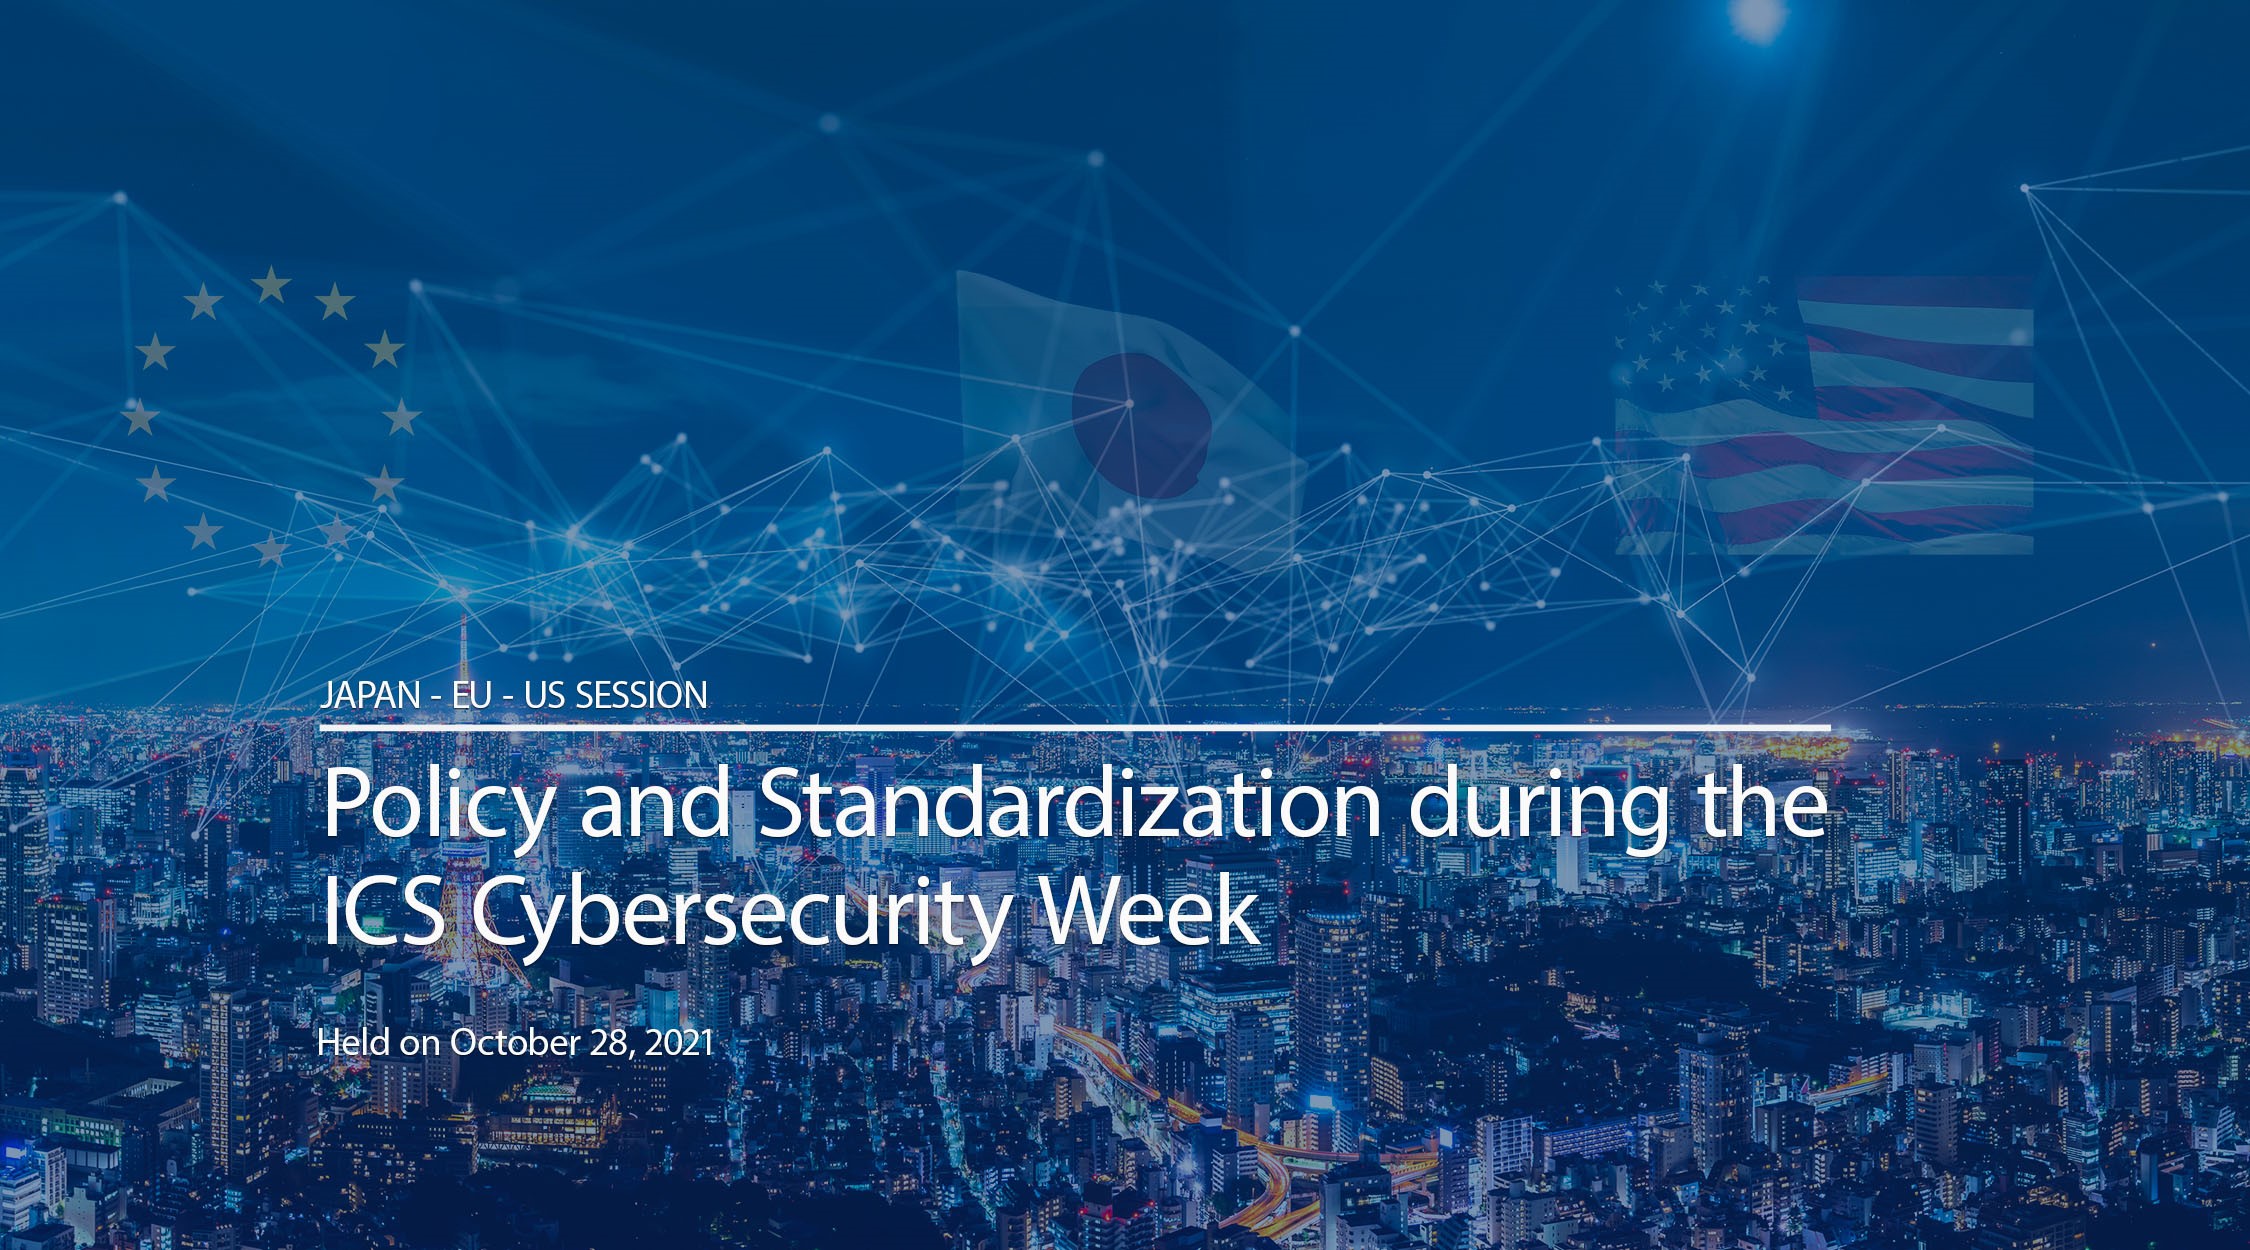 US, EU and Japan experts convened for a Policy and Standards session during the JP-US-EU ICS Cybersecurity week on October 28, 2021.